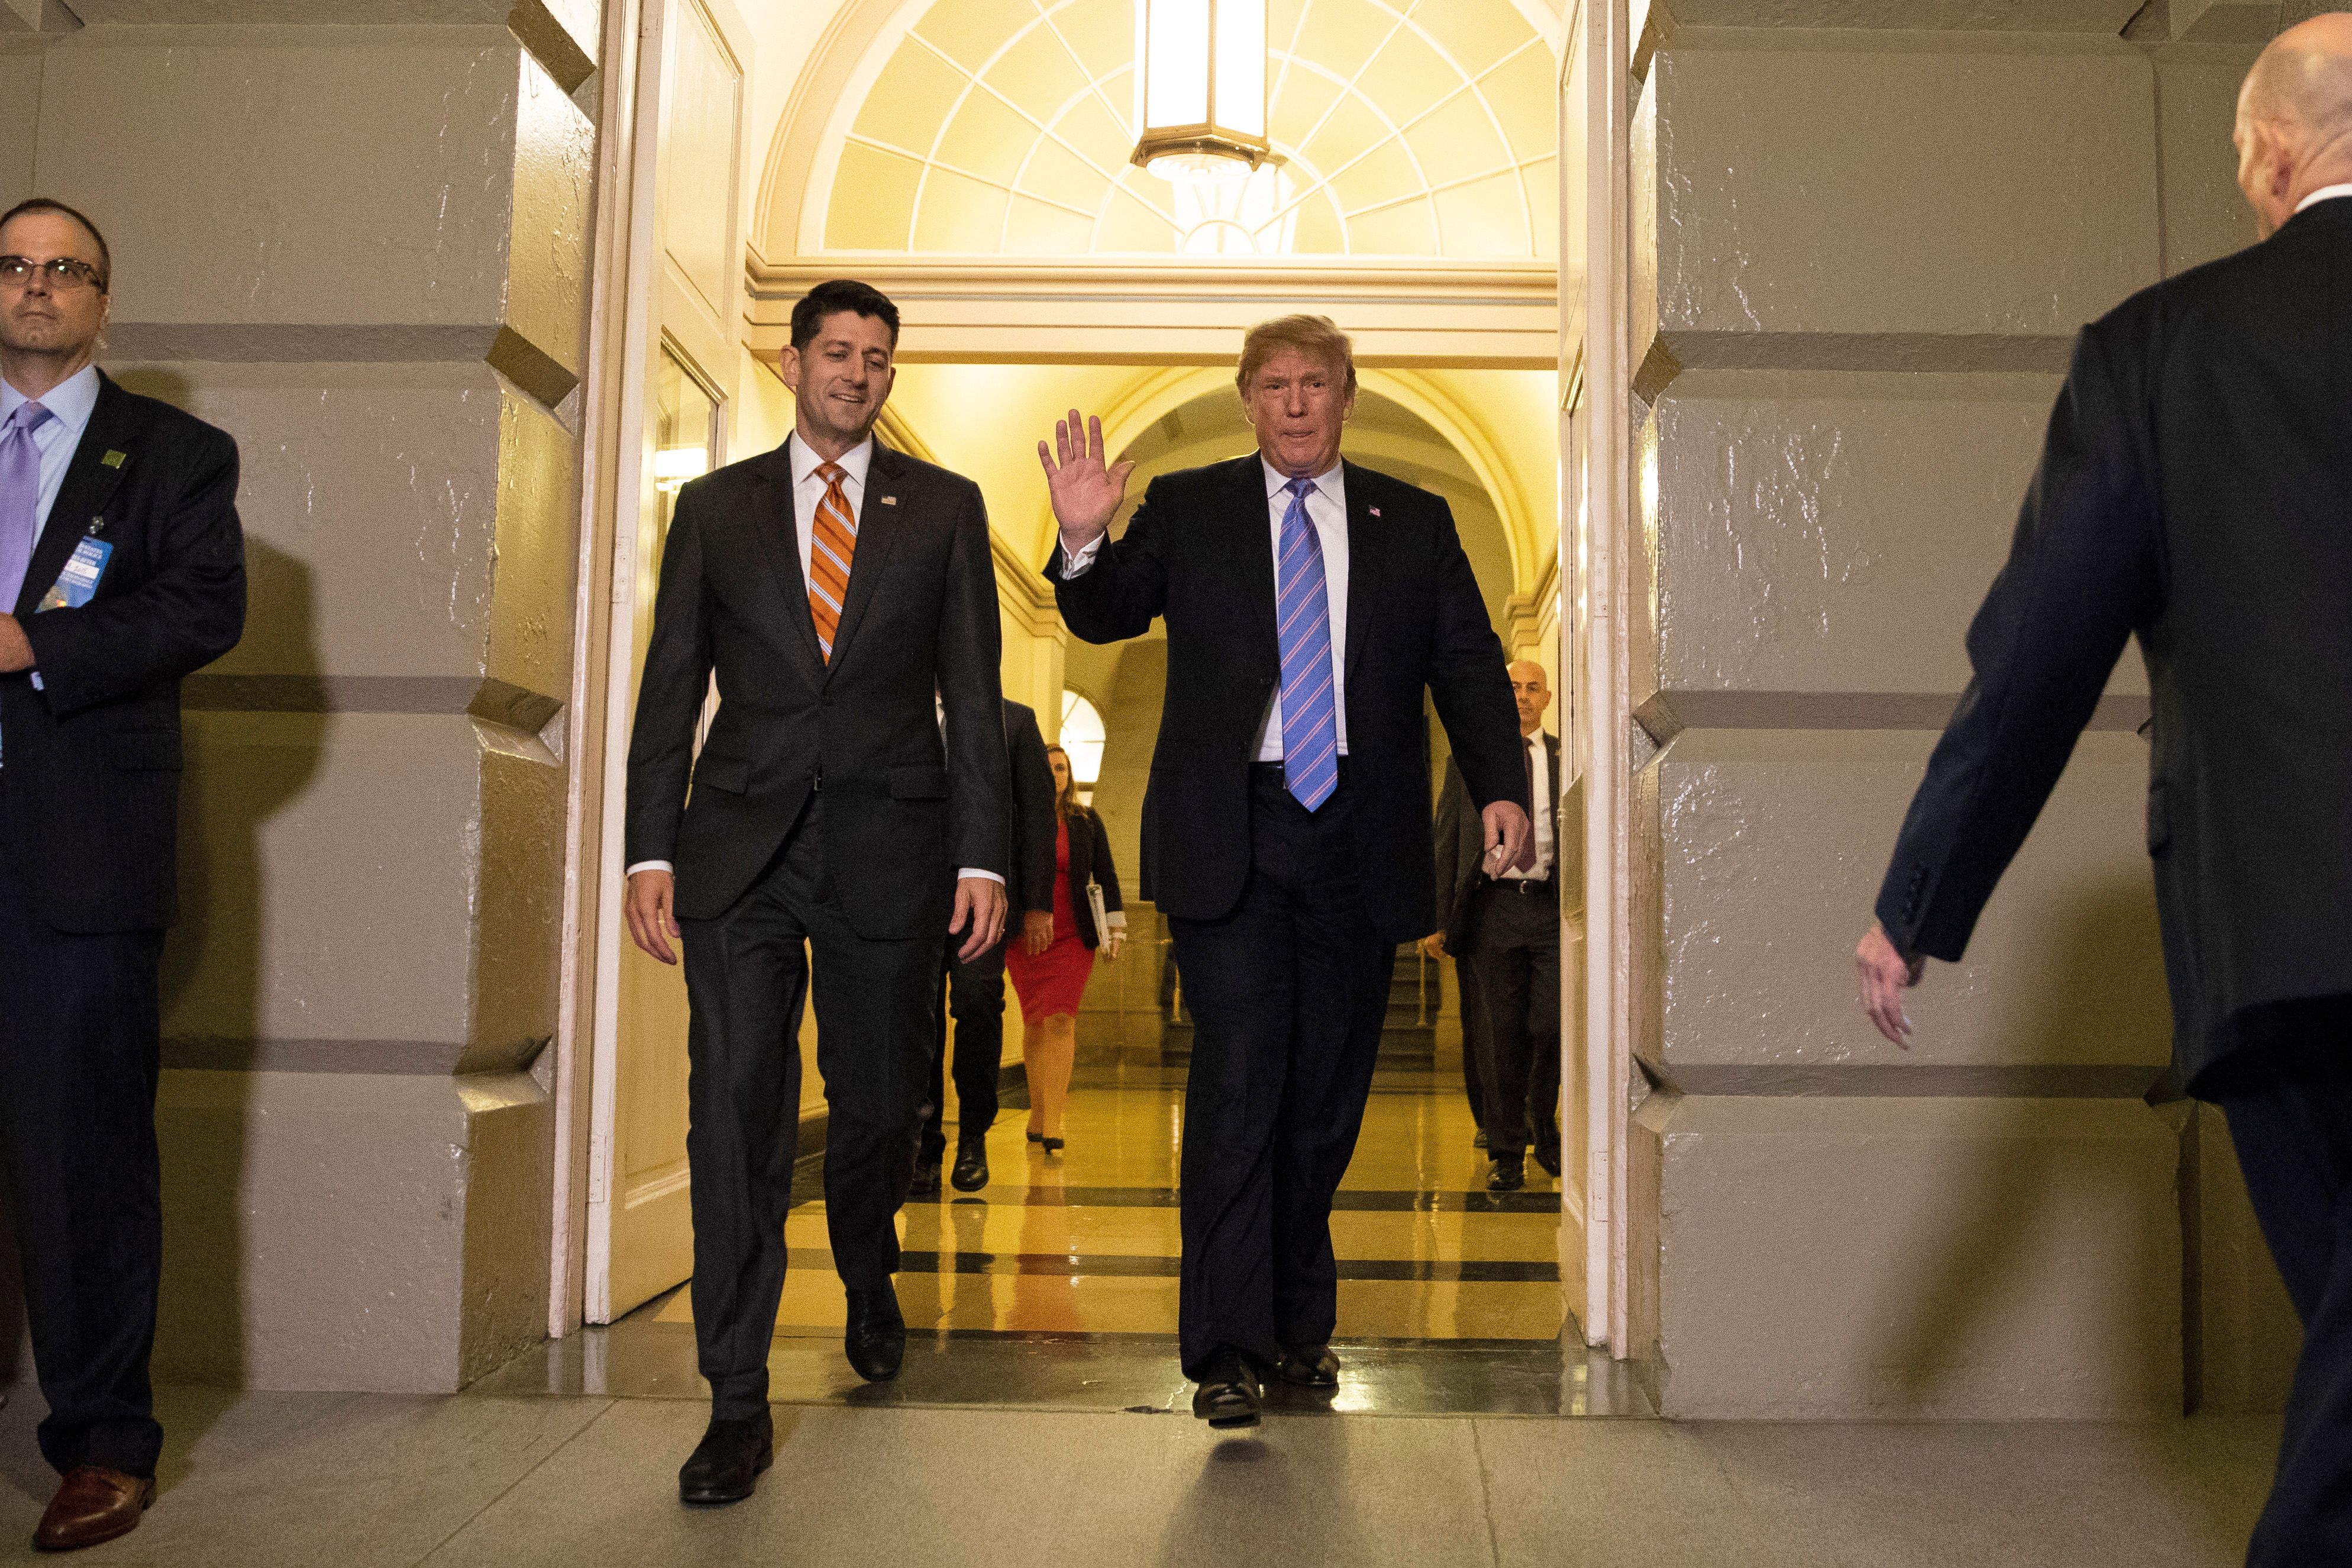 President Trump, accompanied by House Speaker Paul Ryan, arrives for a meeting with Republican members of Congress on June 19, 2018.